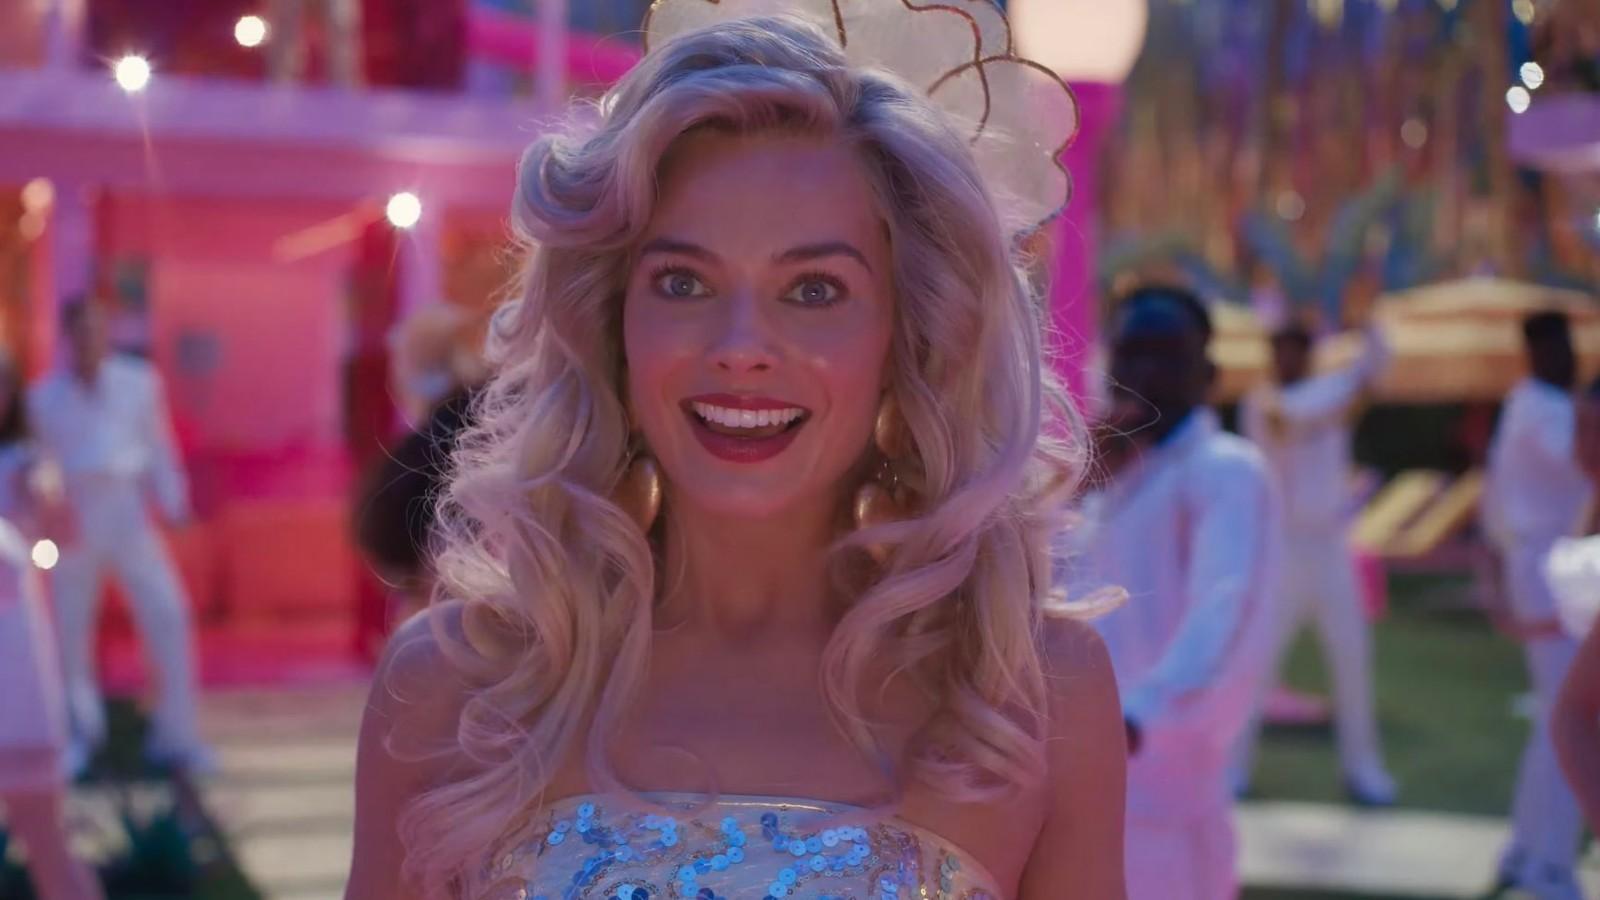 Barbie movie drops a fashionably existential new trailer - Dexerto